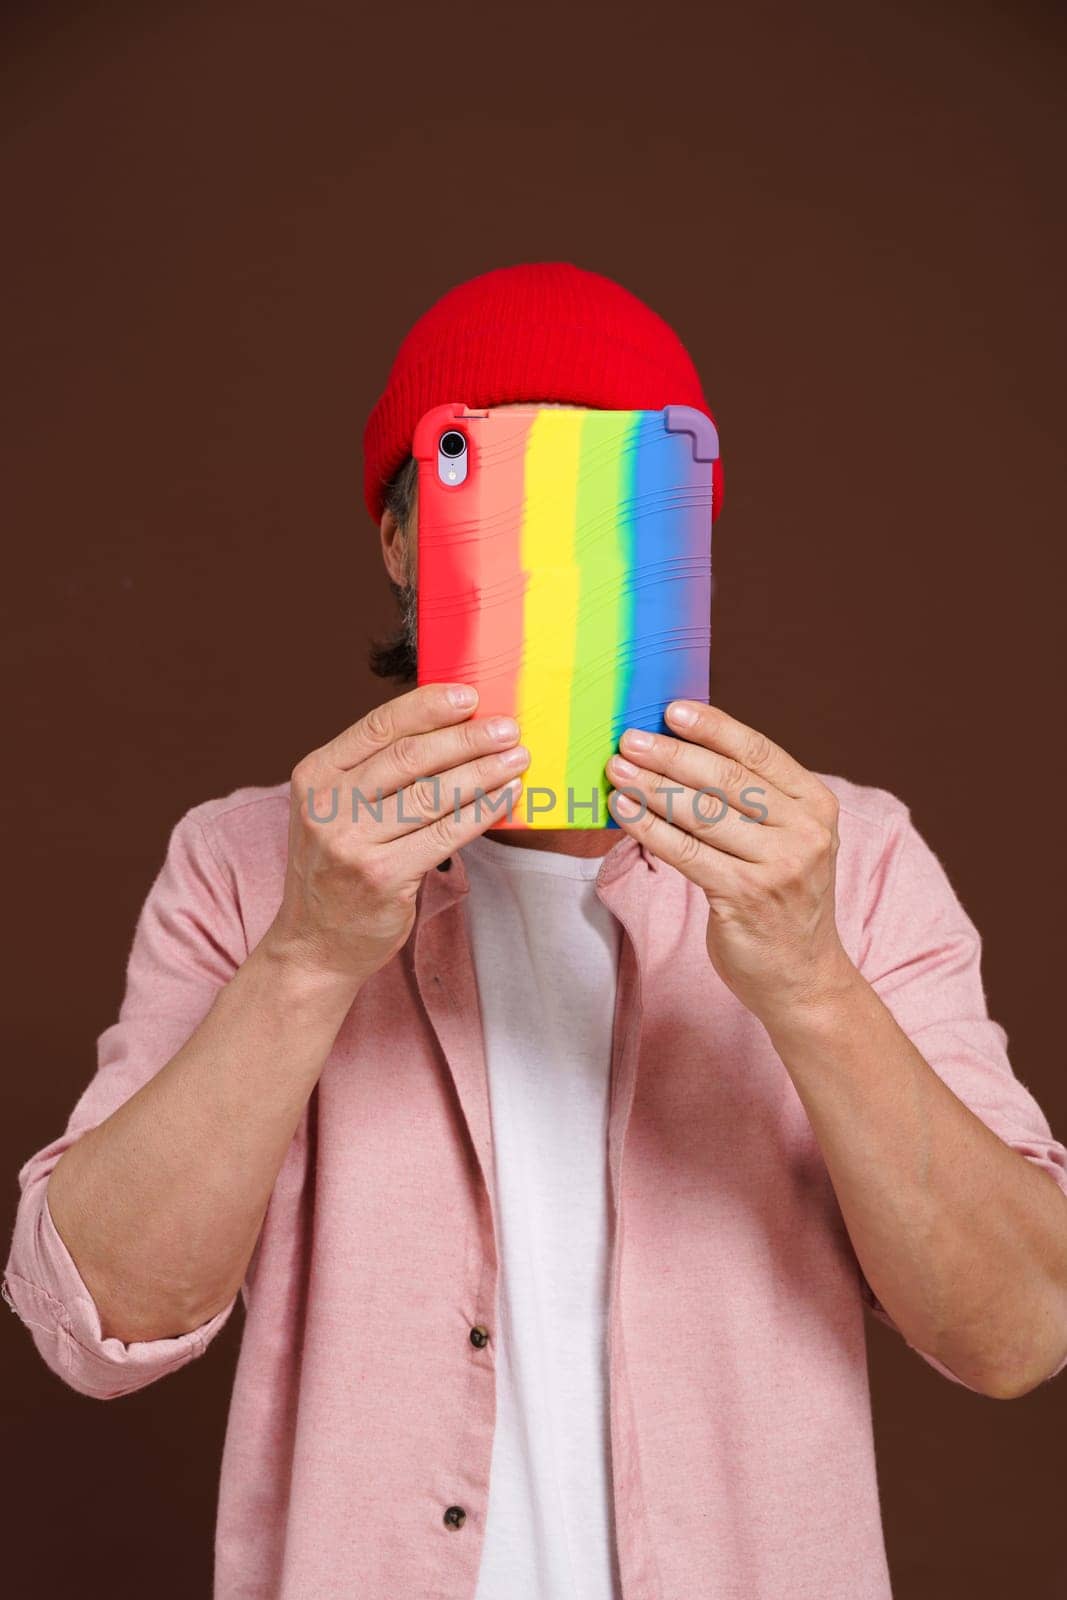 Incognito internet LGBTQ user. The man hides his sexual orientation, covers his face with a tablet in a rainbow case. by LipikStockMedia